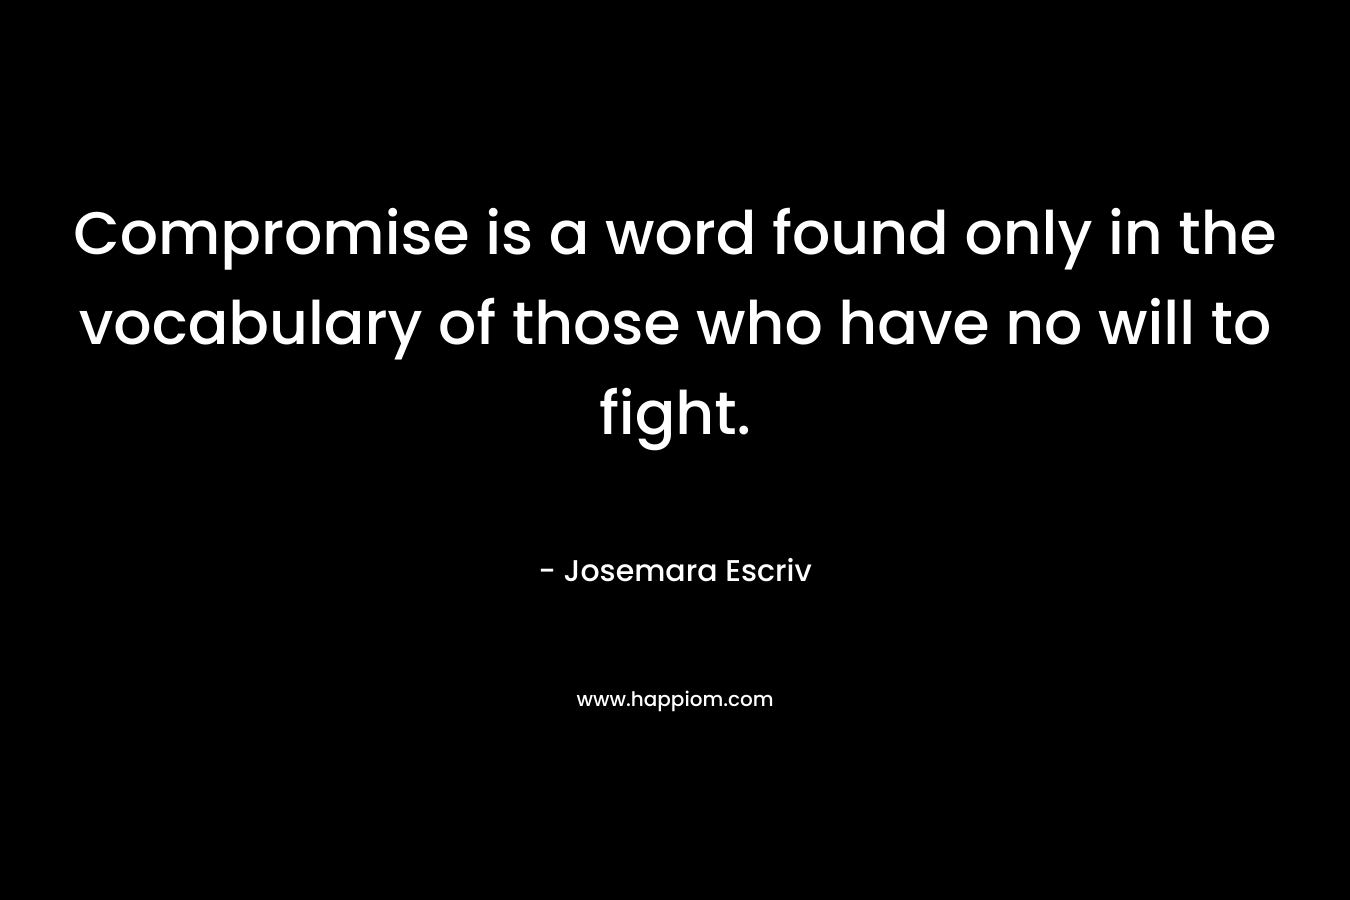 Compromise is a word found only in the vocabulary of those who have no will to fight. – Josemara Escriv